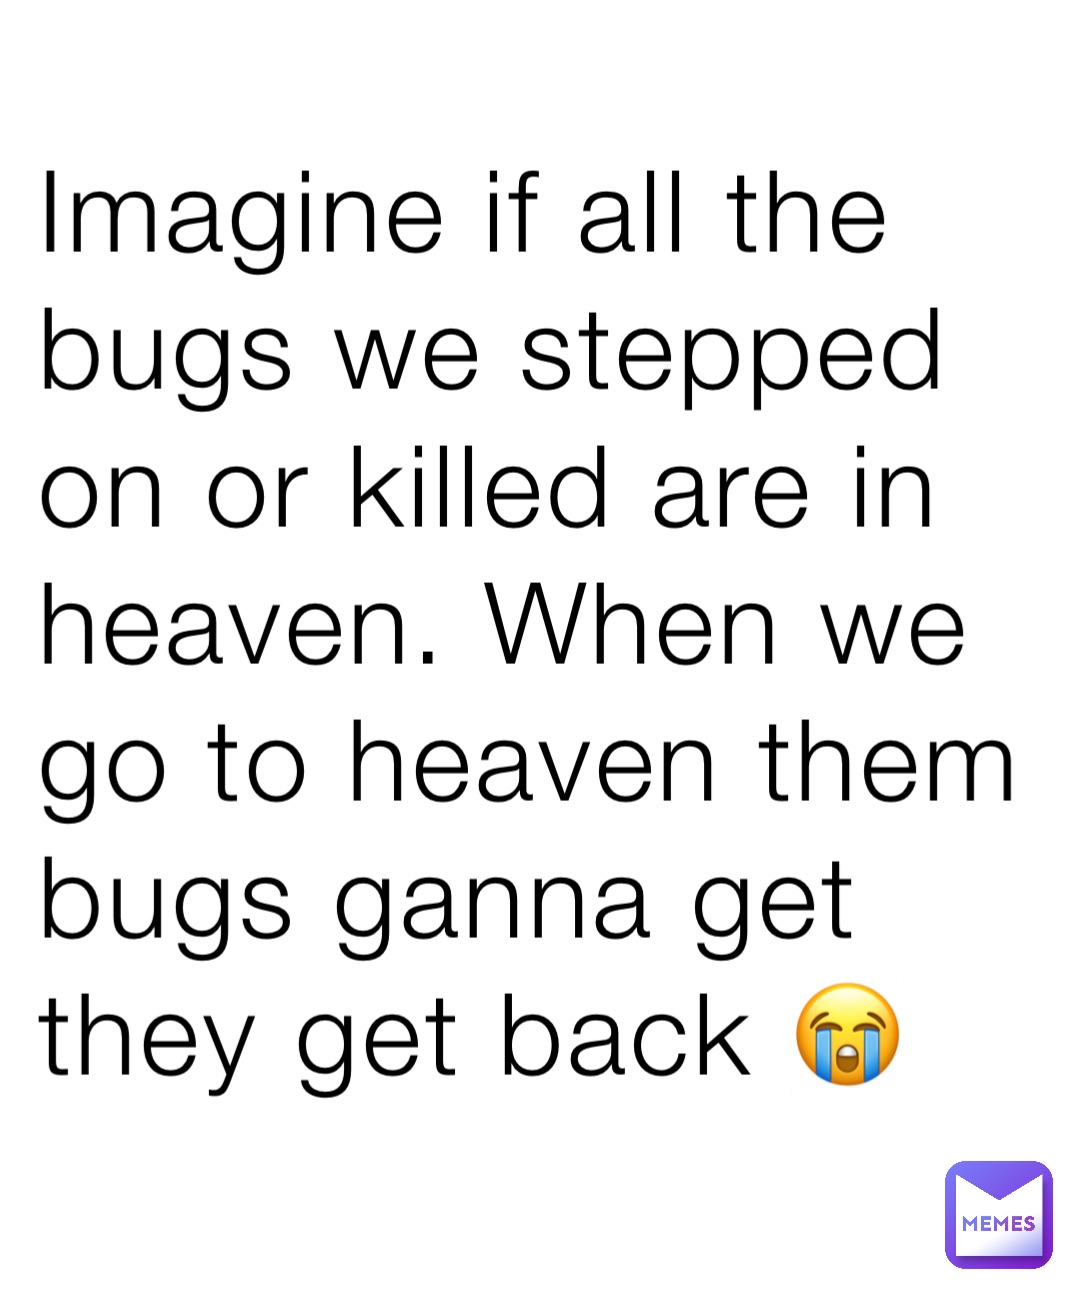 Imagine if all the bugs we stepped on or killed are in heaven. When we go to heaven them bugs ganna get they get back 😭